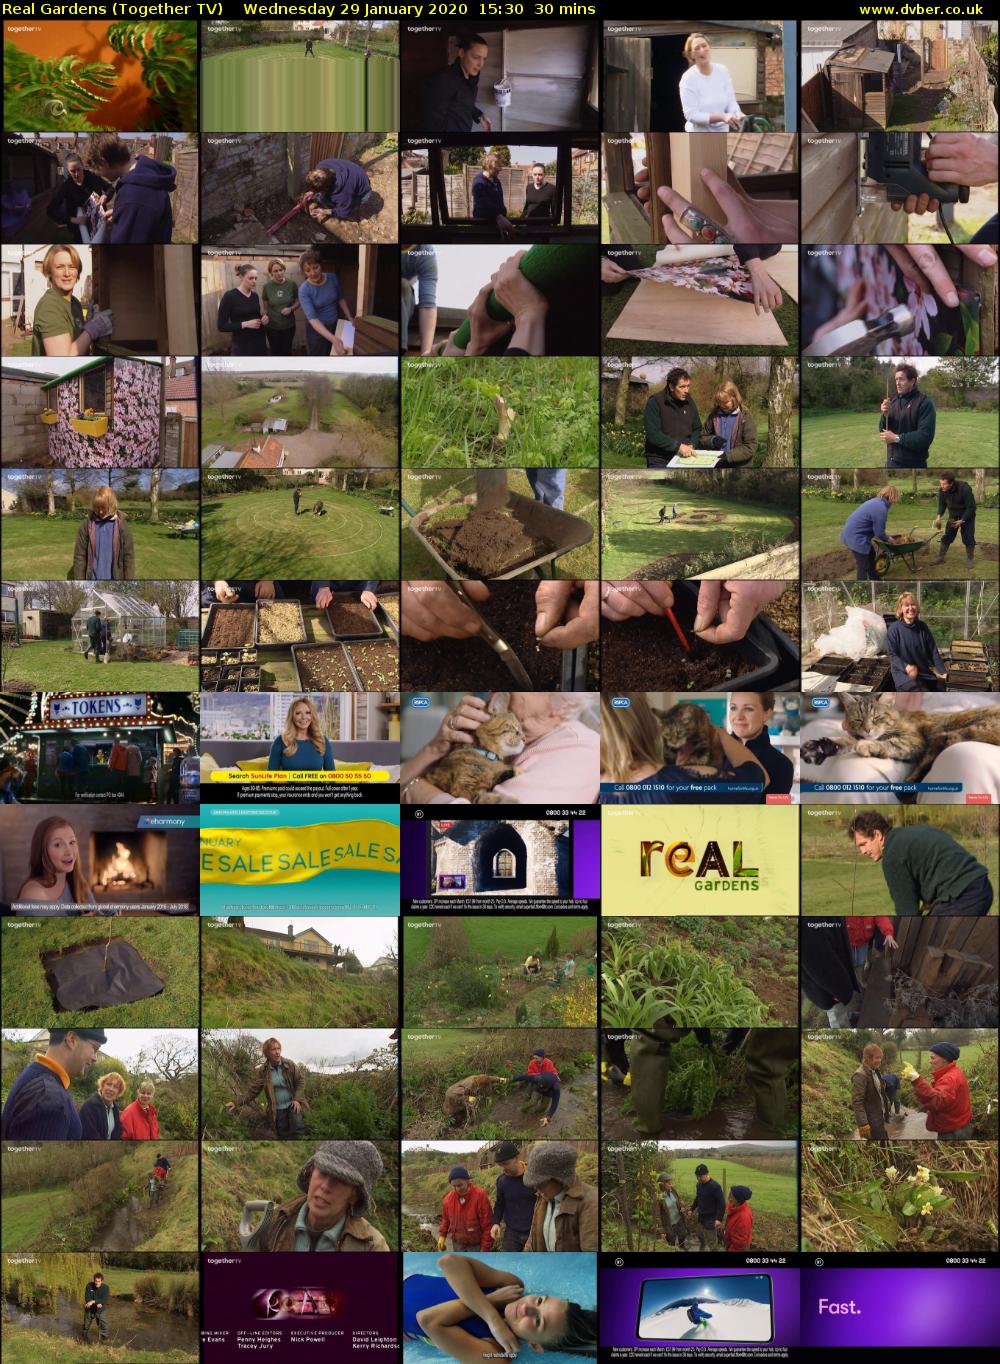 Real Gardens (Together TV) Wednesday 29 January 2020 15:30 - 16:00